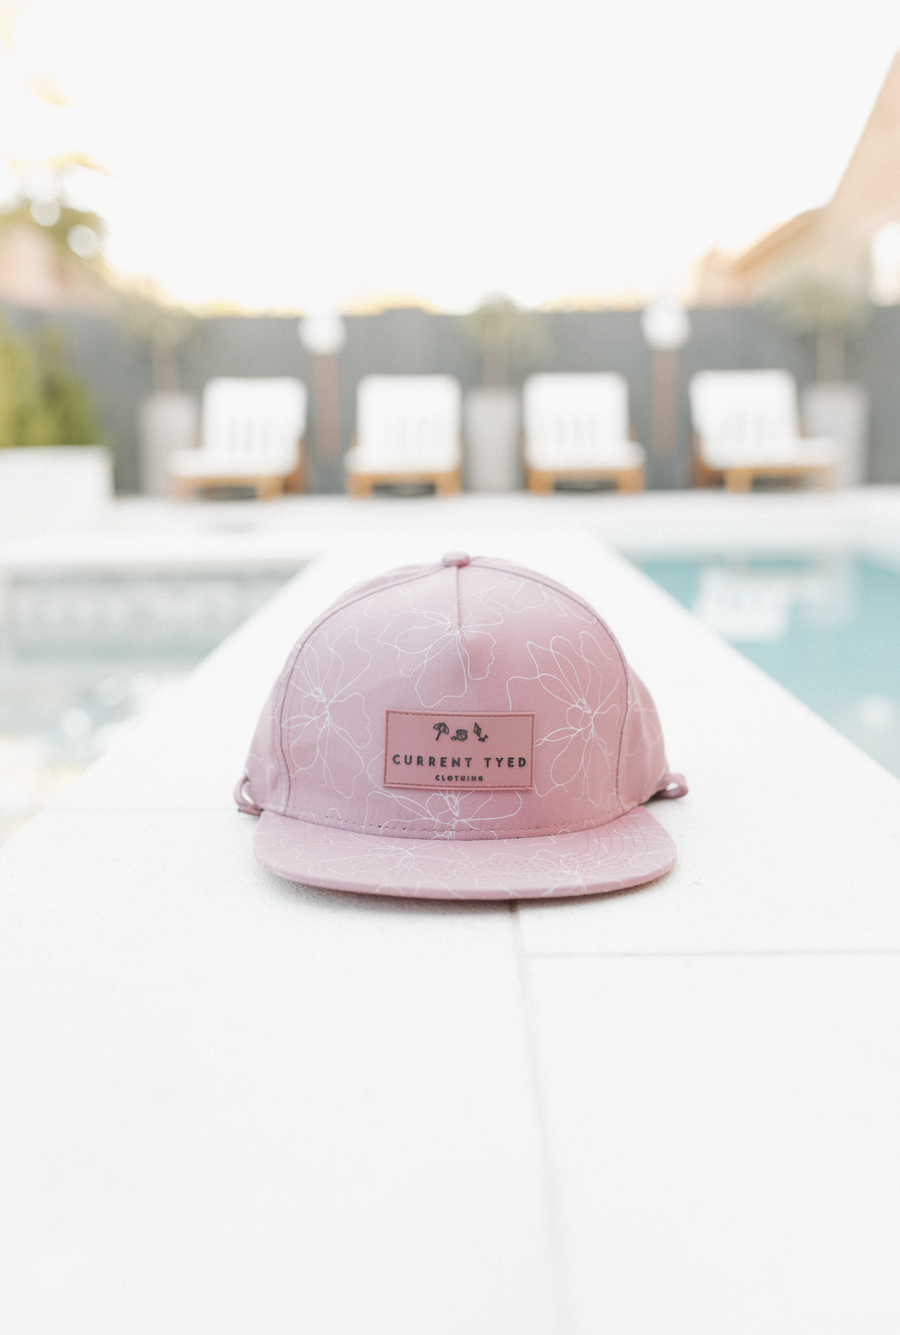 Classic Waterproof Snapback Hats – Current Tyed